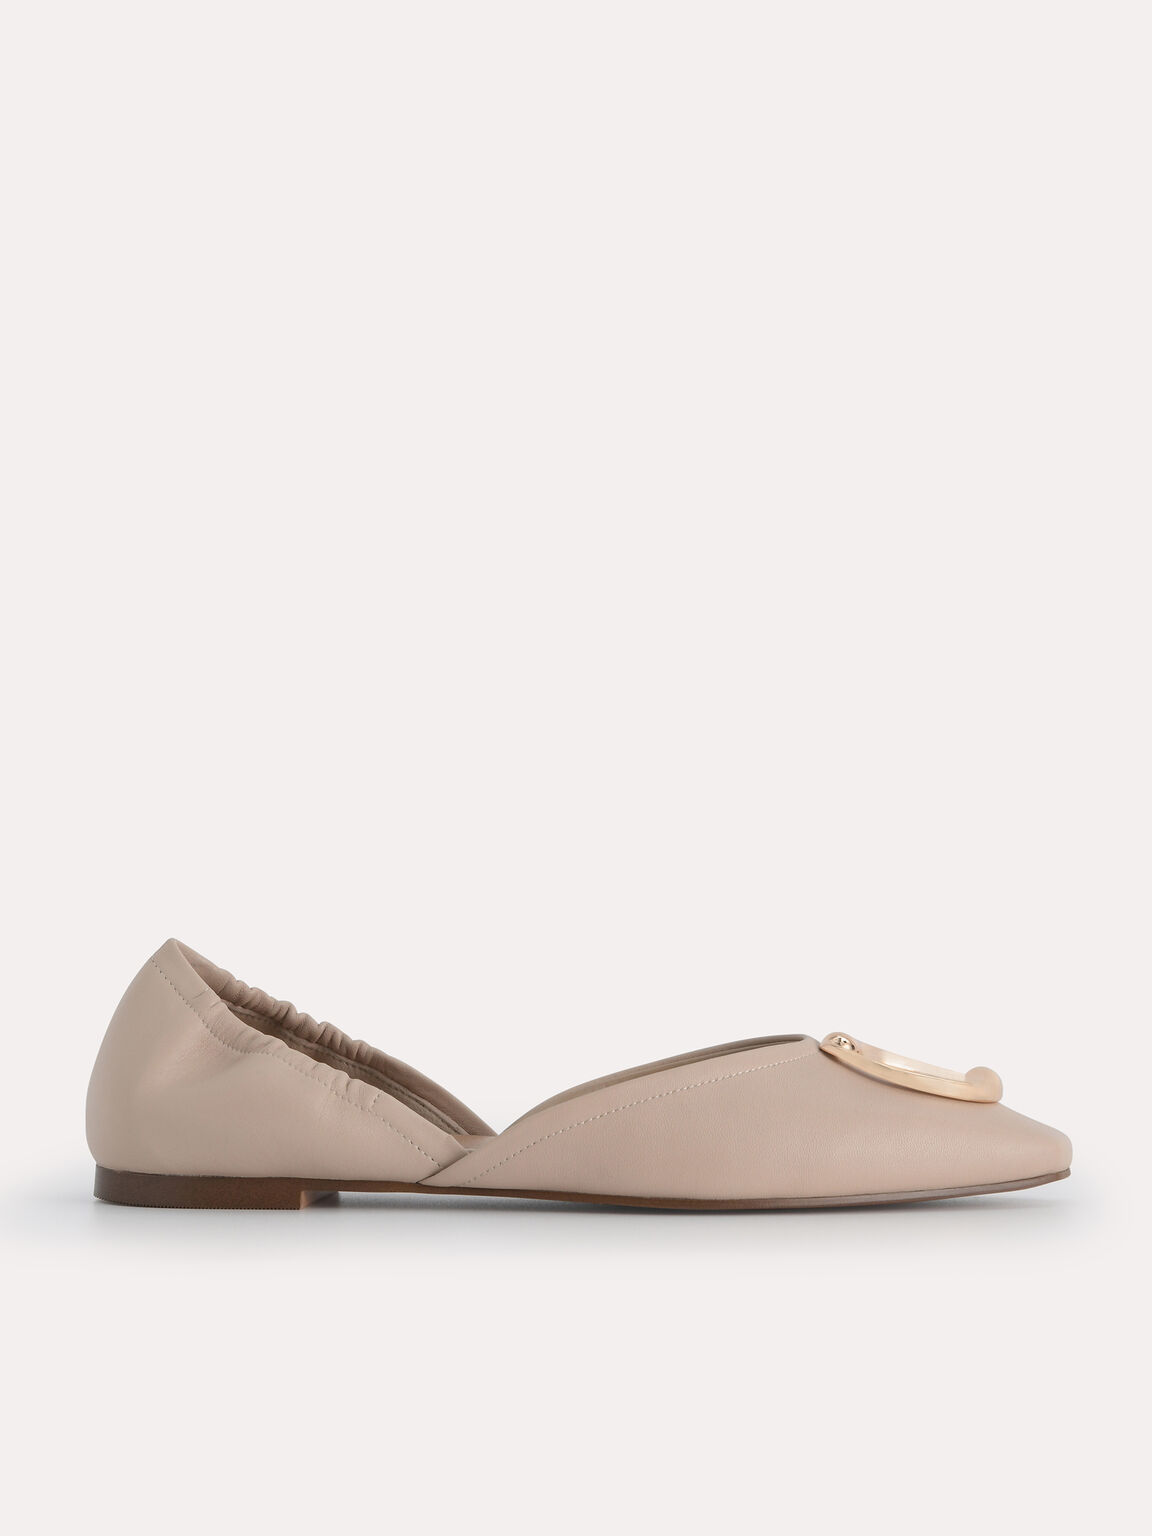 Leather Flats, Nude